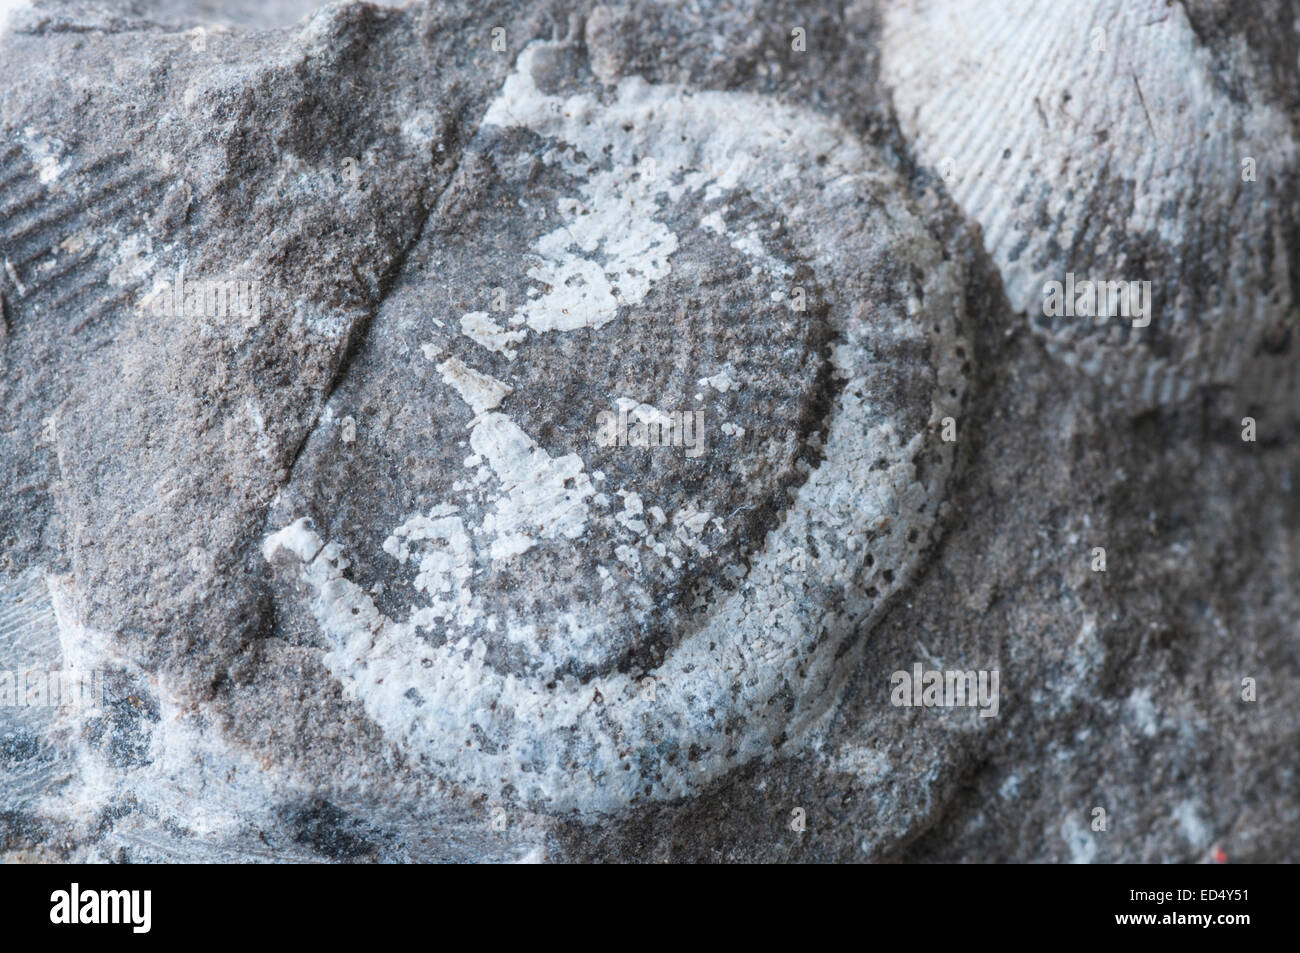 Brachial valve of the Carboniferous brachiopod Productus from Wensleydale, North Yorkshire Stock Photo